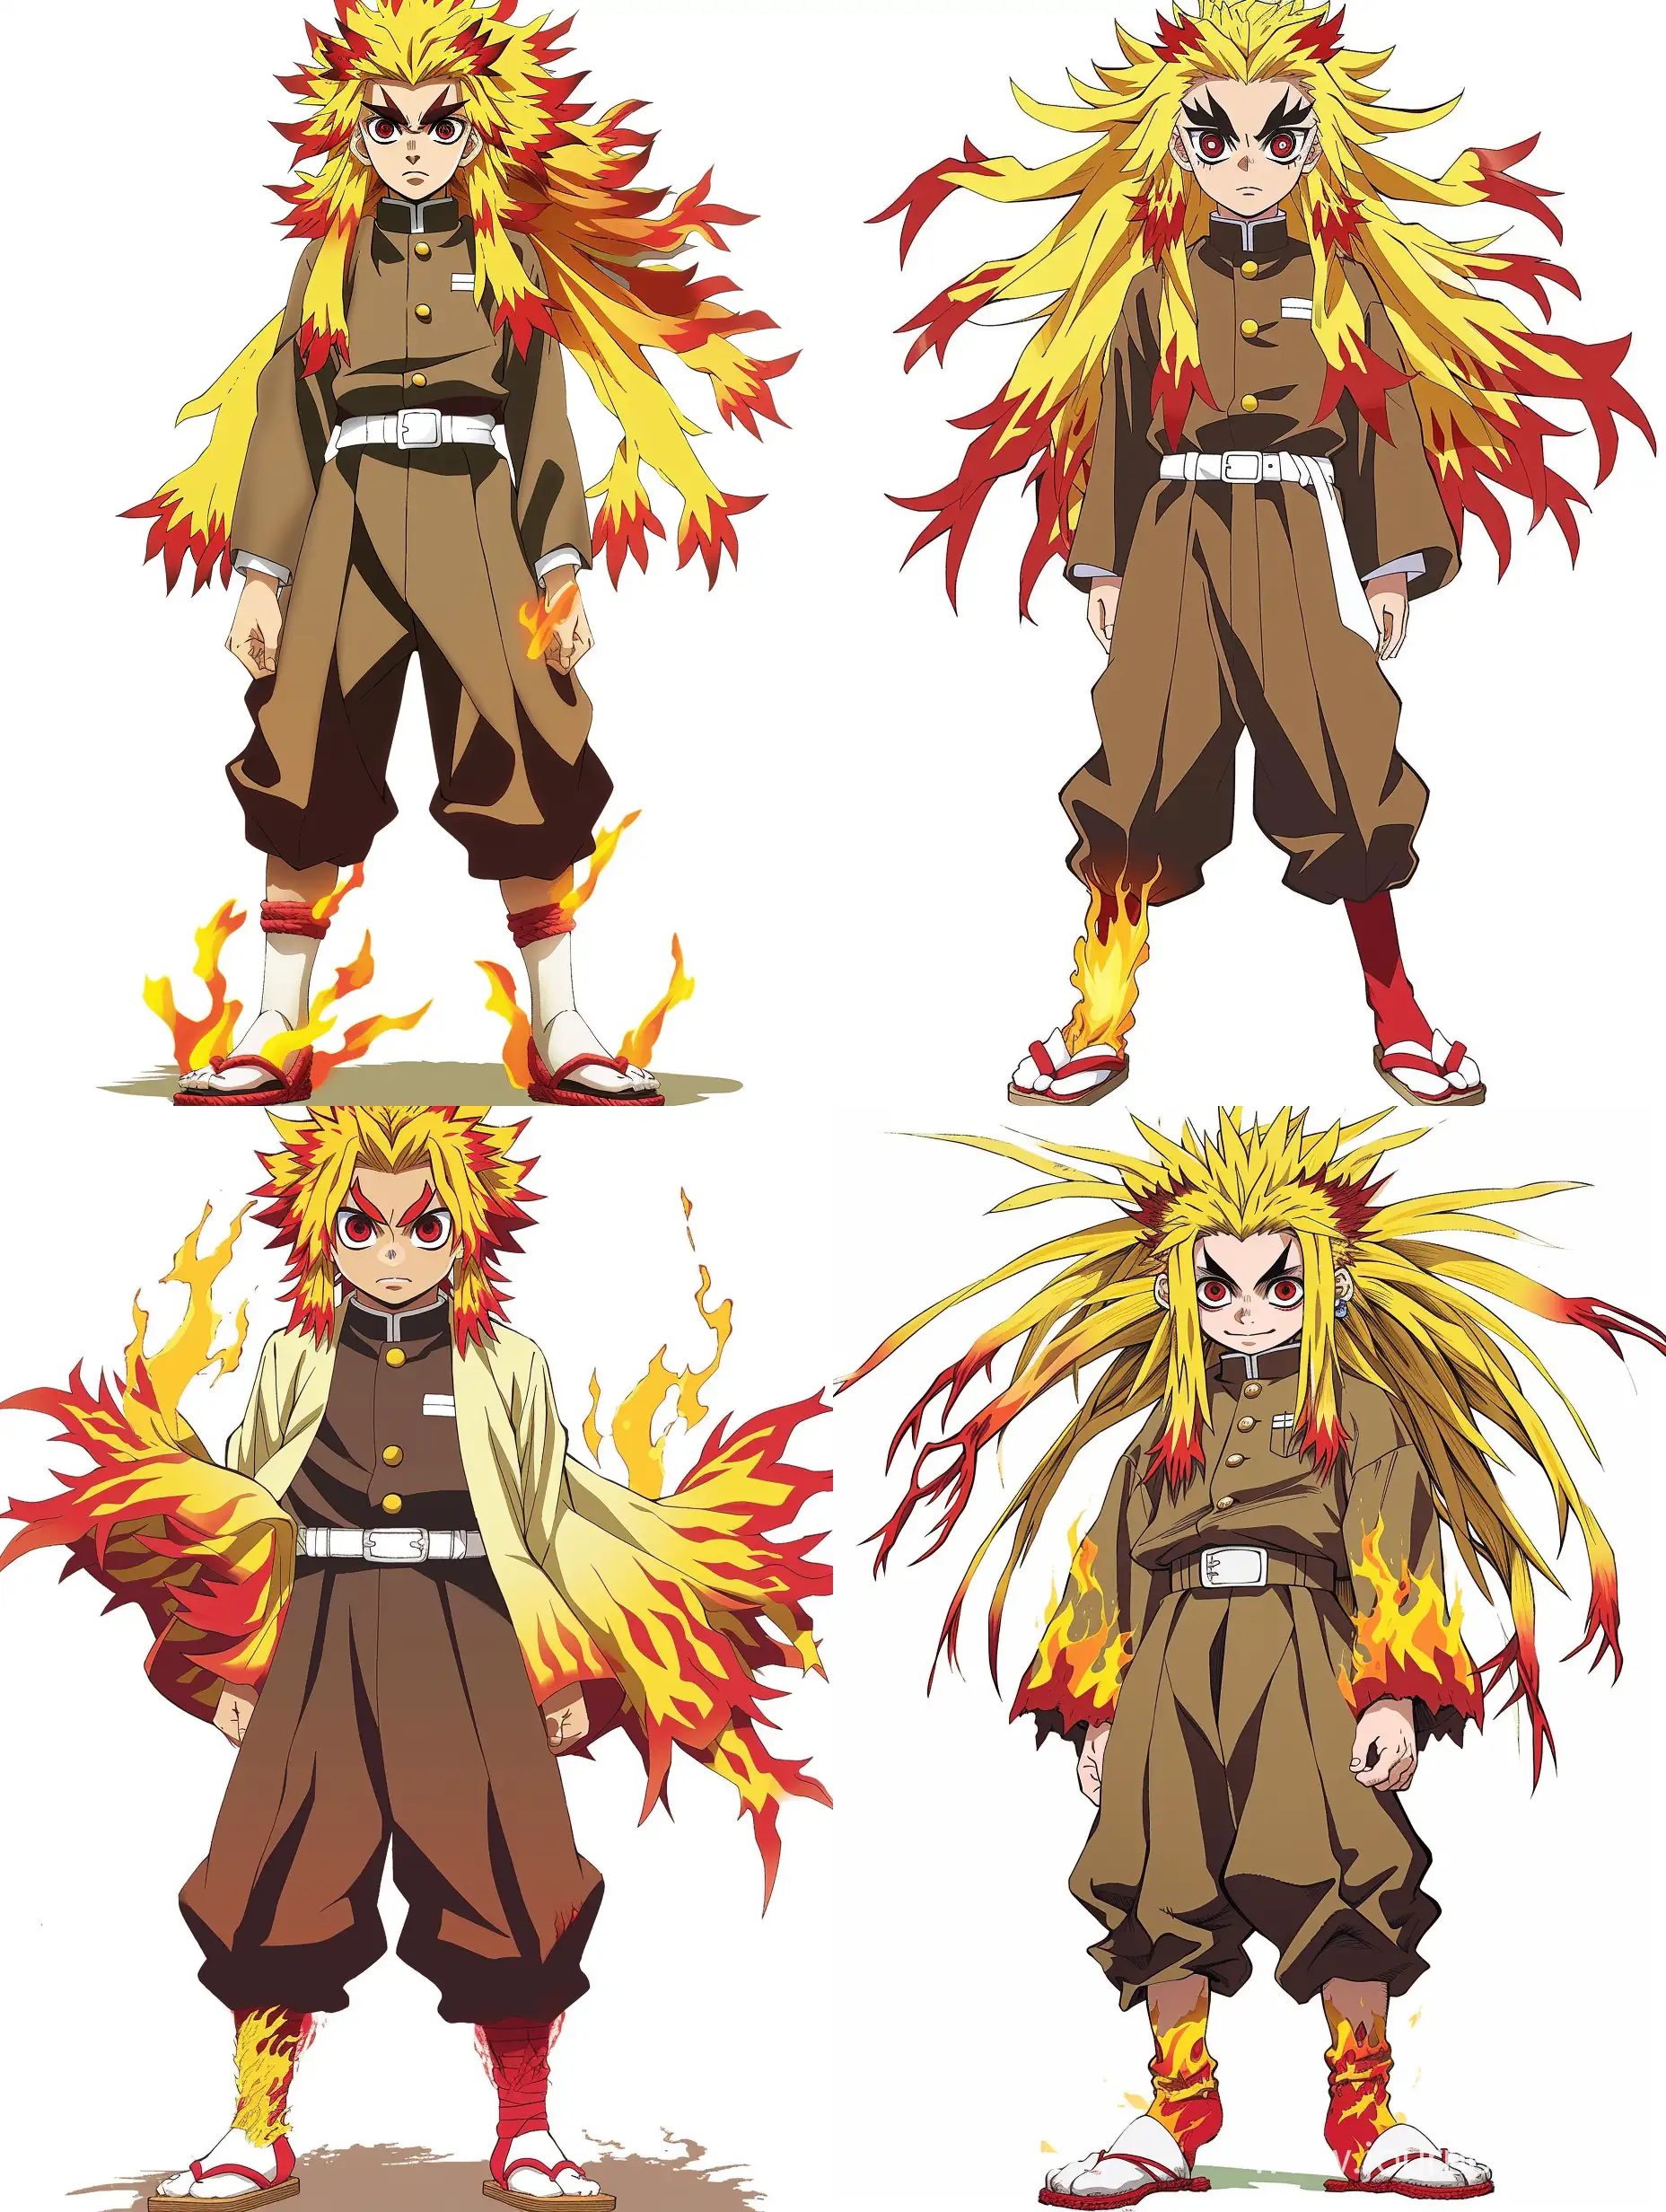 a young tall guy with a strong build. The most striking feature of his appearance is his bright yellow hair with long strands turning red in places. He is also distinguished by thick forked eyebrows and wide-open eyes. He wears a lighter, brown uniform. Over his uniform, he wears a haori with a flame-like pattern and protrusions at the hem,. On his feet he wears red tabi socks with yellow flames erupting from the bottom up, with a pair of white dzauri with red straps.